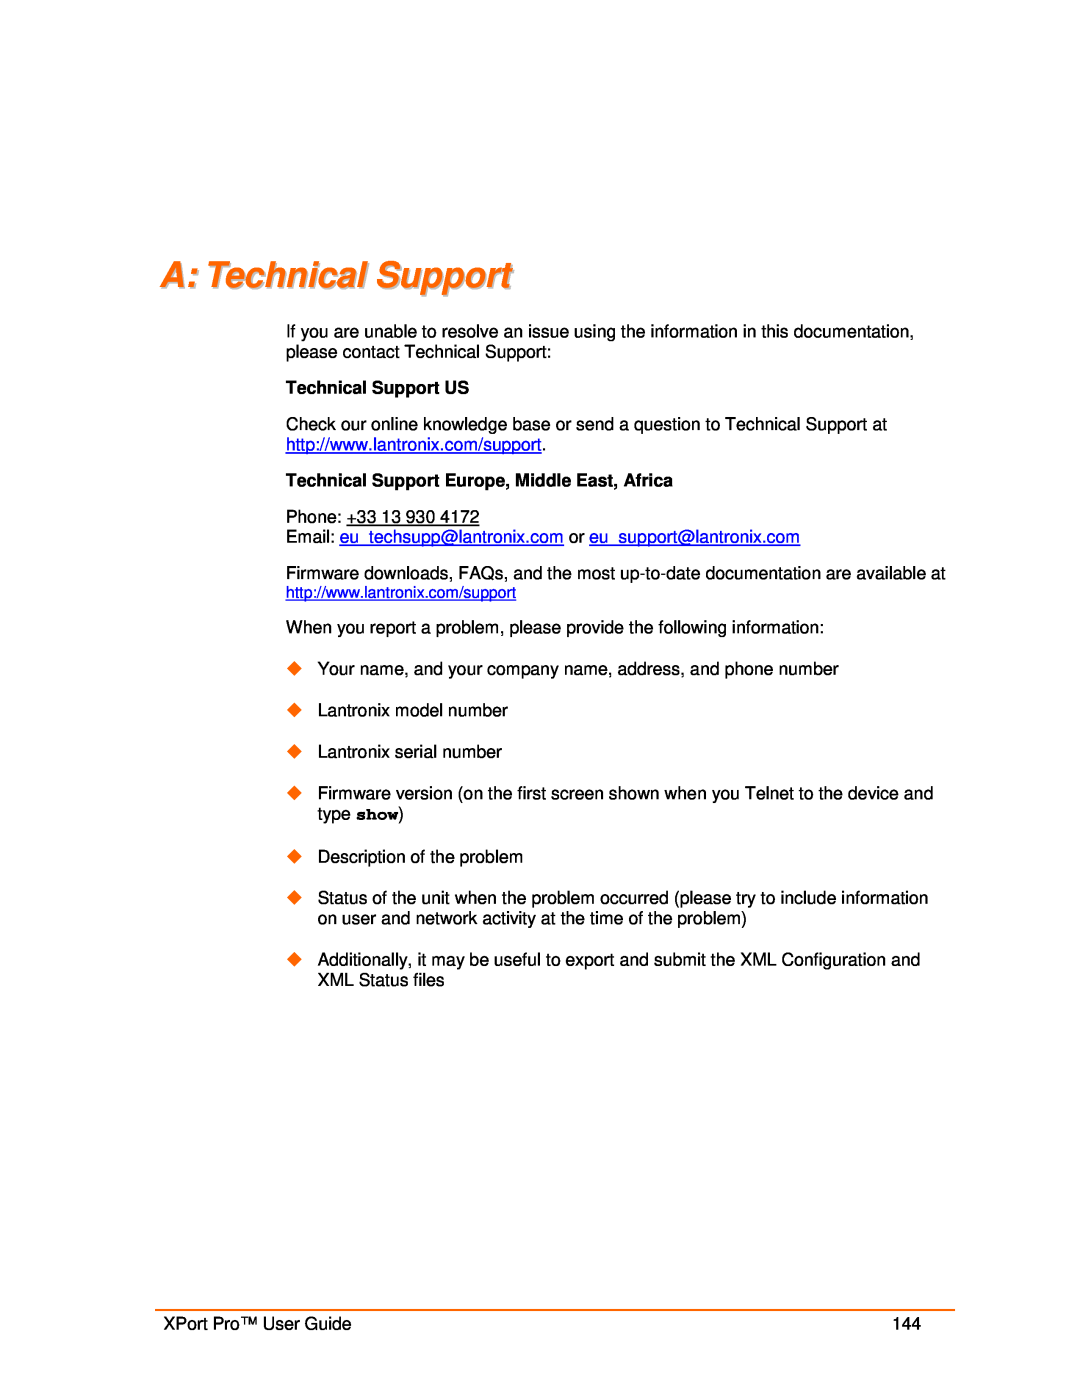 Lantronix 900-560 manual A Technical Support, Technical Support US, Technical Support Europe, Middle East, Africa 